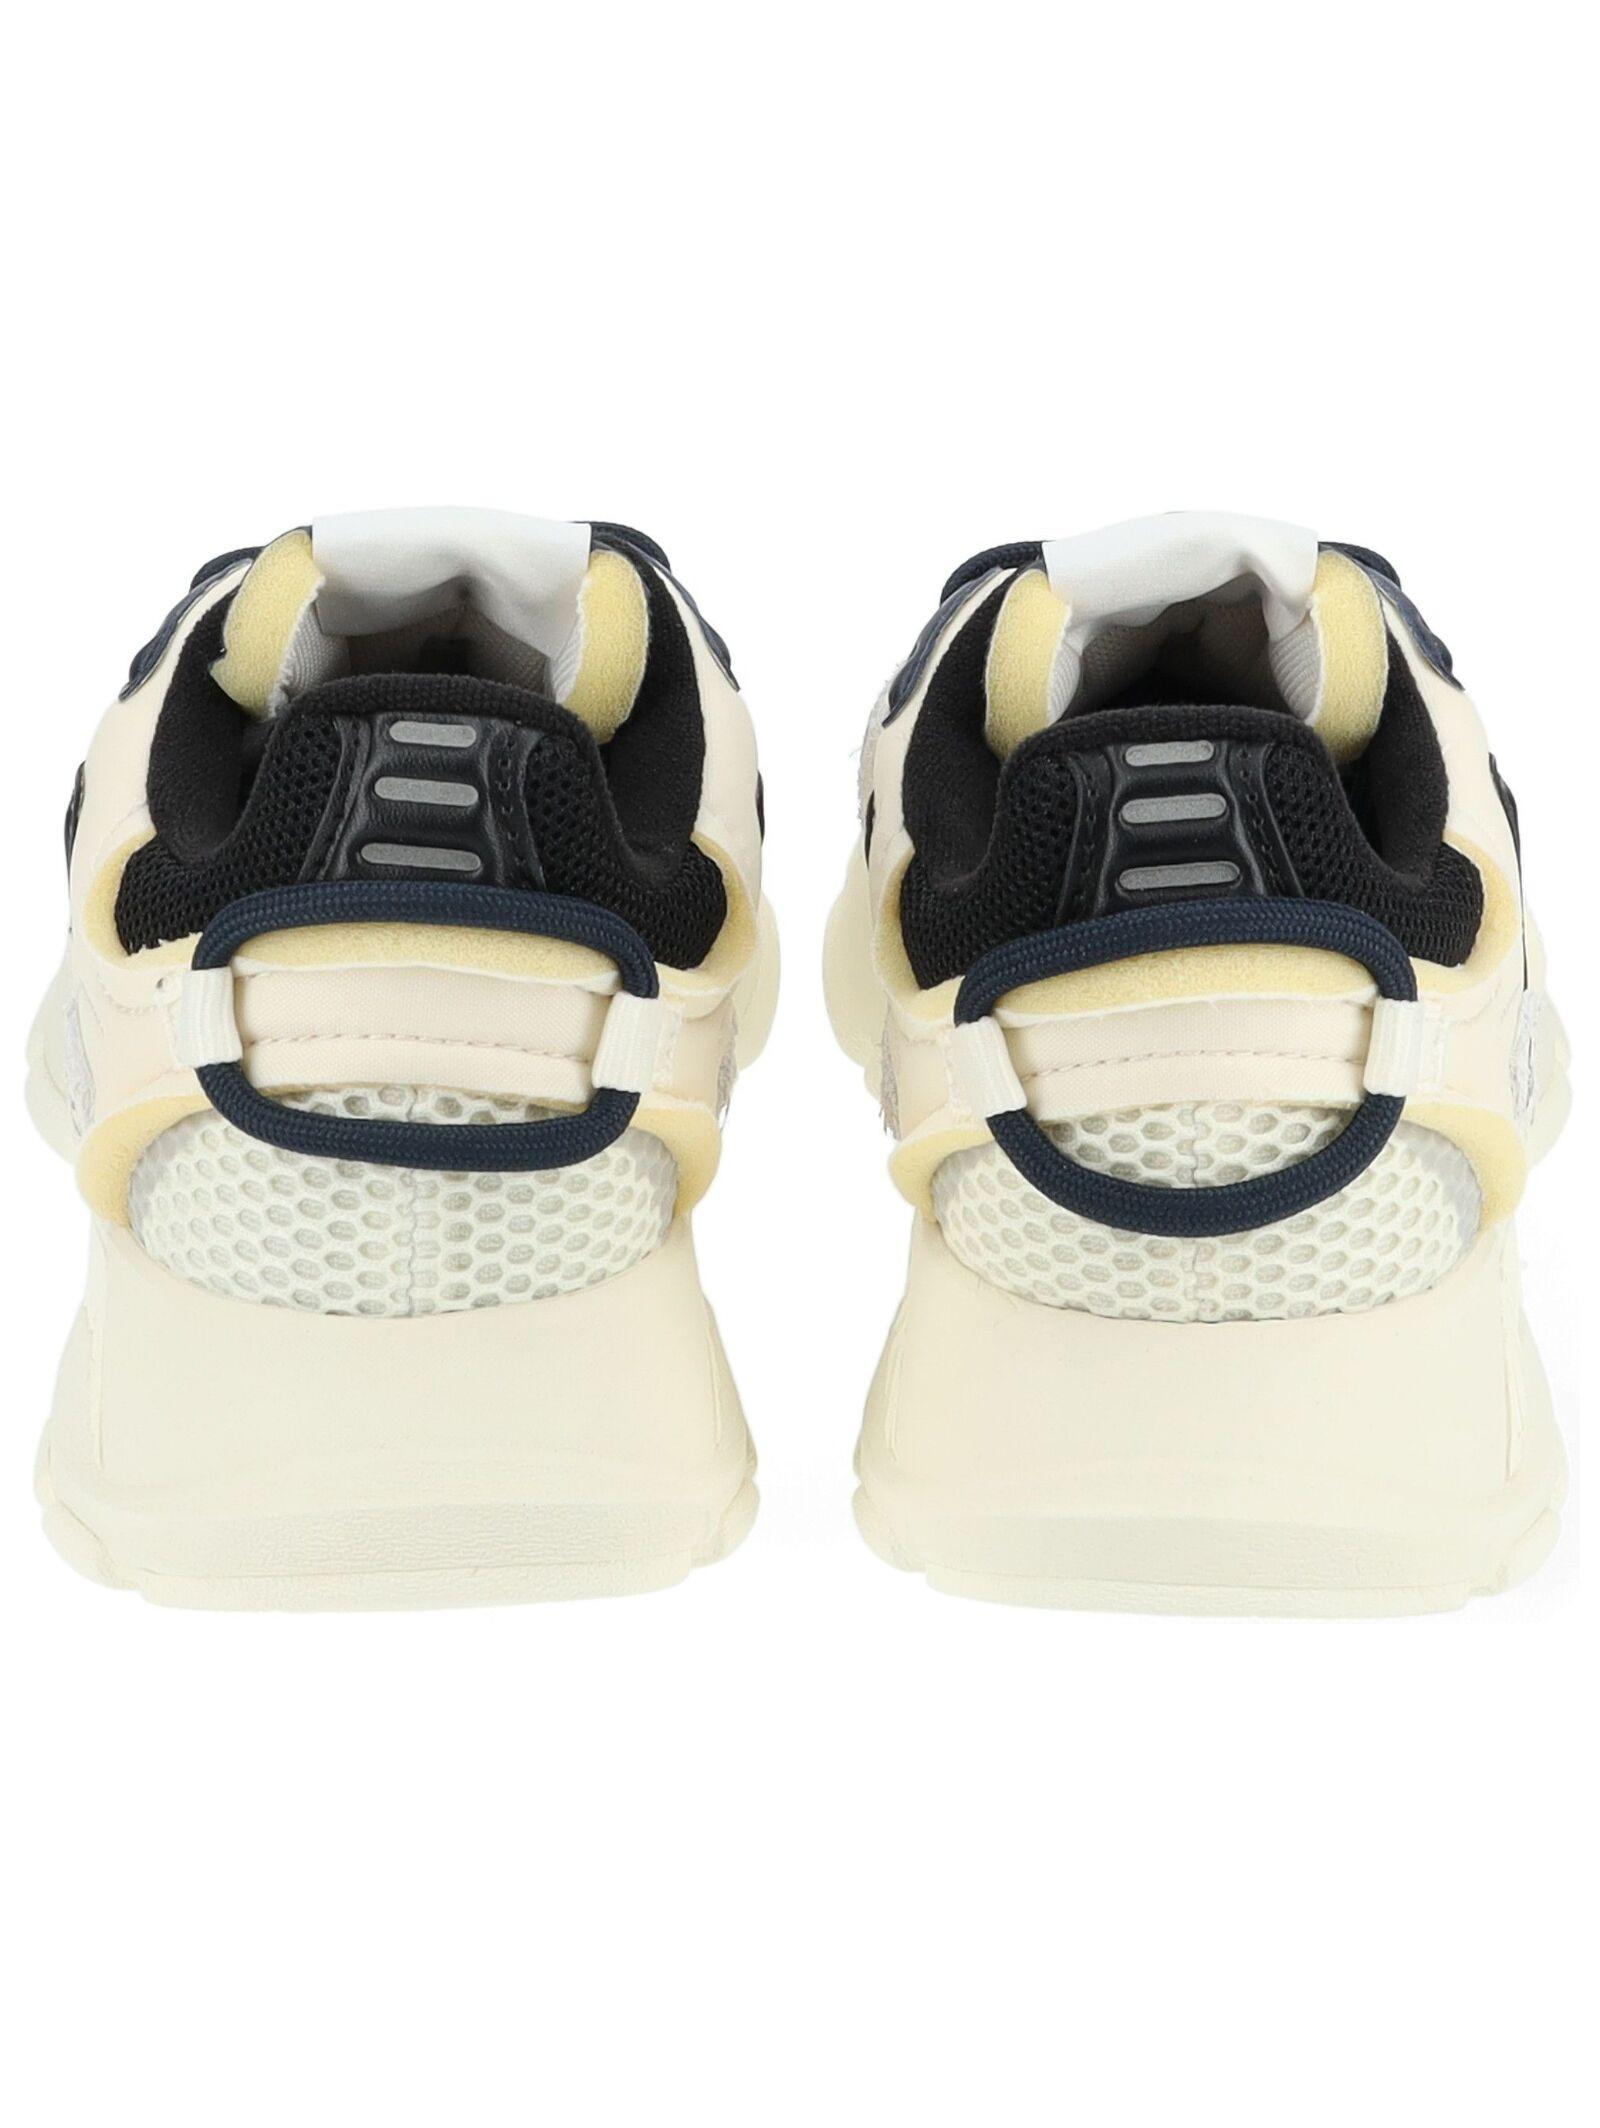 LACOSTE L003 Neo LOO3 Neo - Sneaker Tessile 